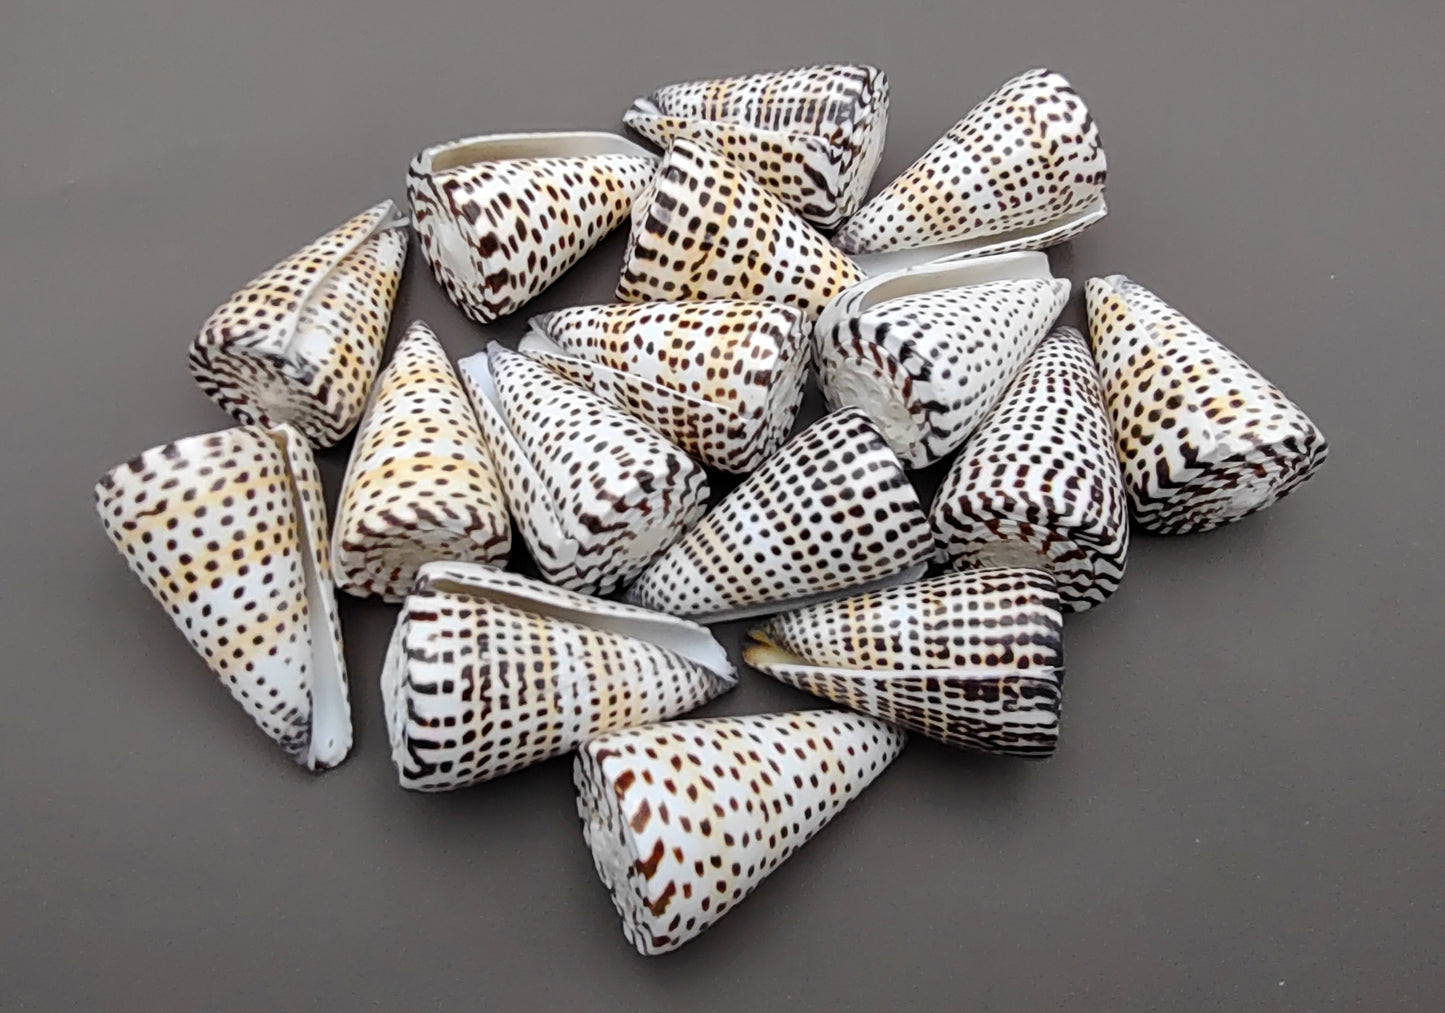 Lettered/Alphabet Cone Seashell - Conus Litteratus - (1 shell approx. 3-4 inches). one multi row and spotted shell. Copyright 2022 SeaShellSupply.com.